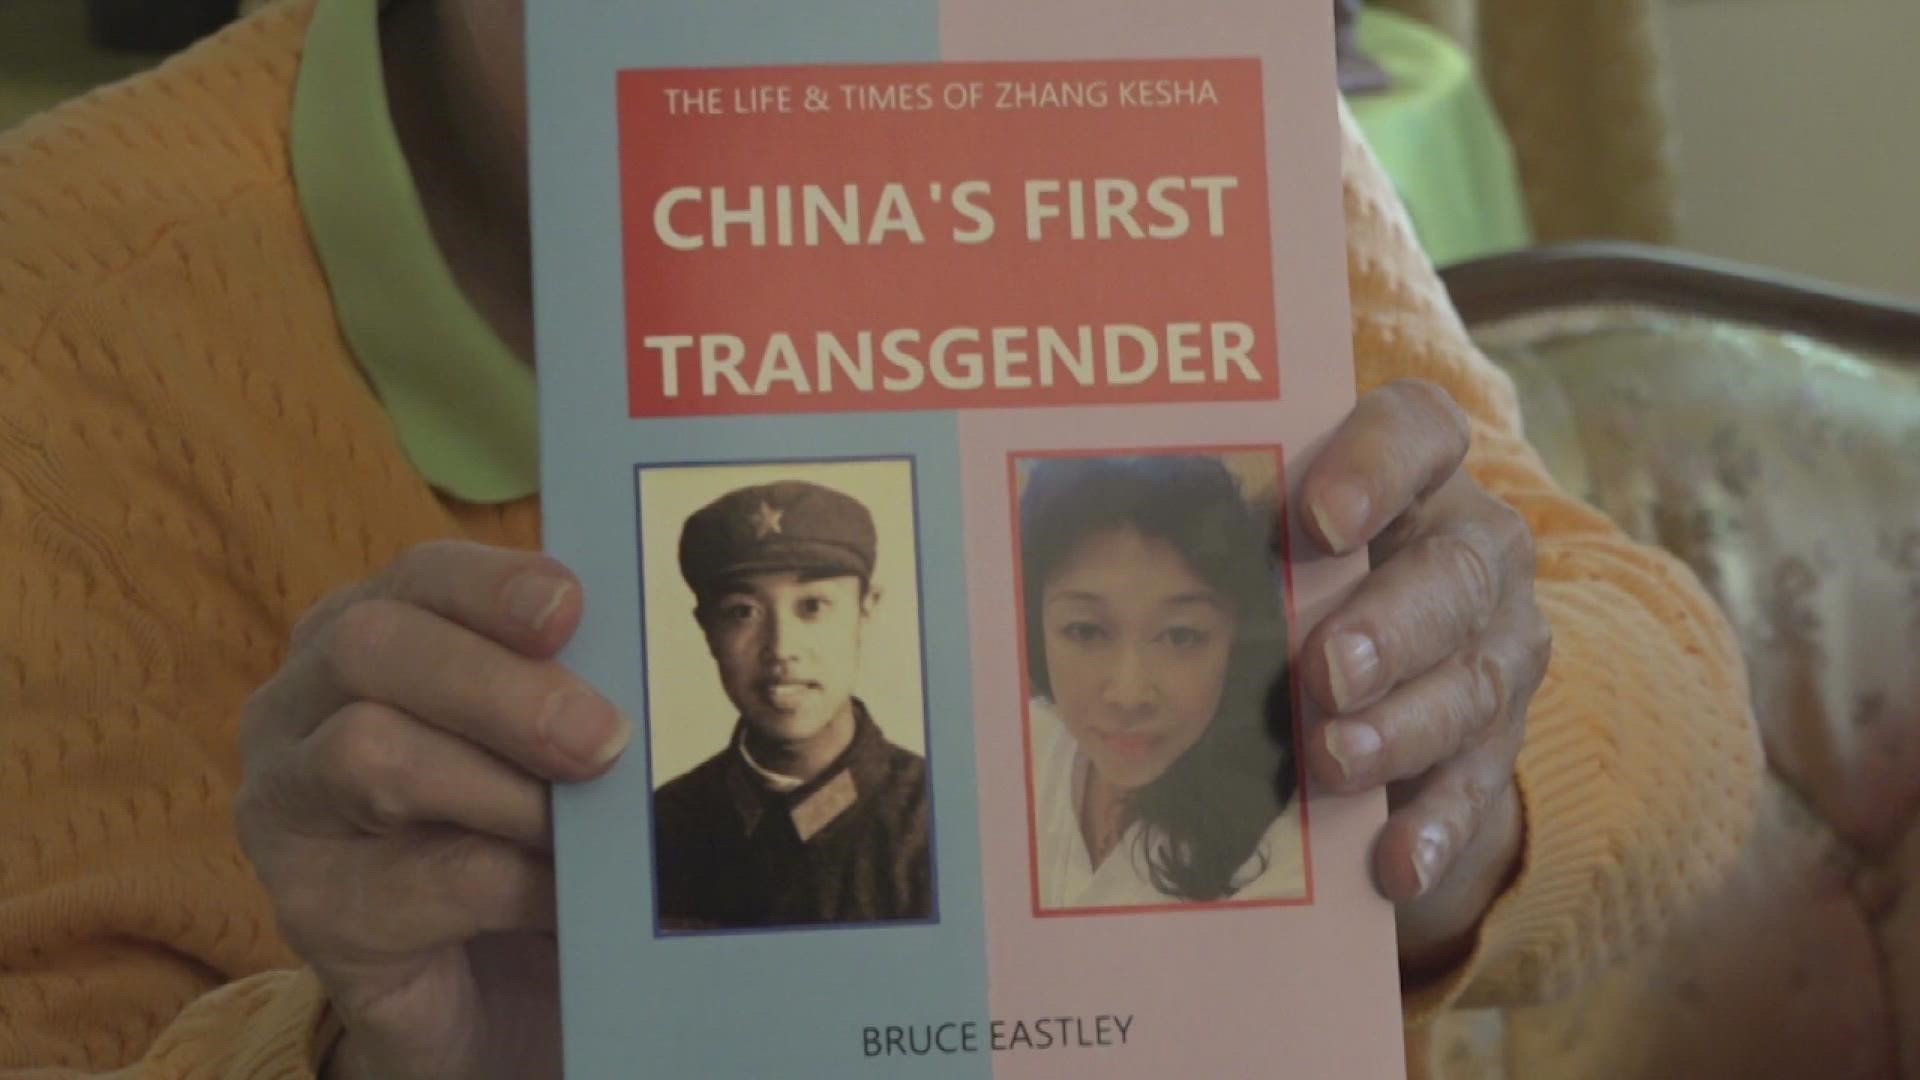 There was a book signing on Sunday, January 8th for an autobiography about one of China's first transgender women who's currently living in Sacramento.